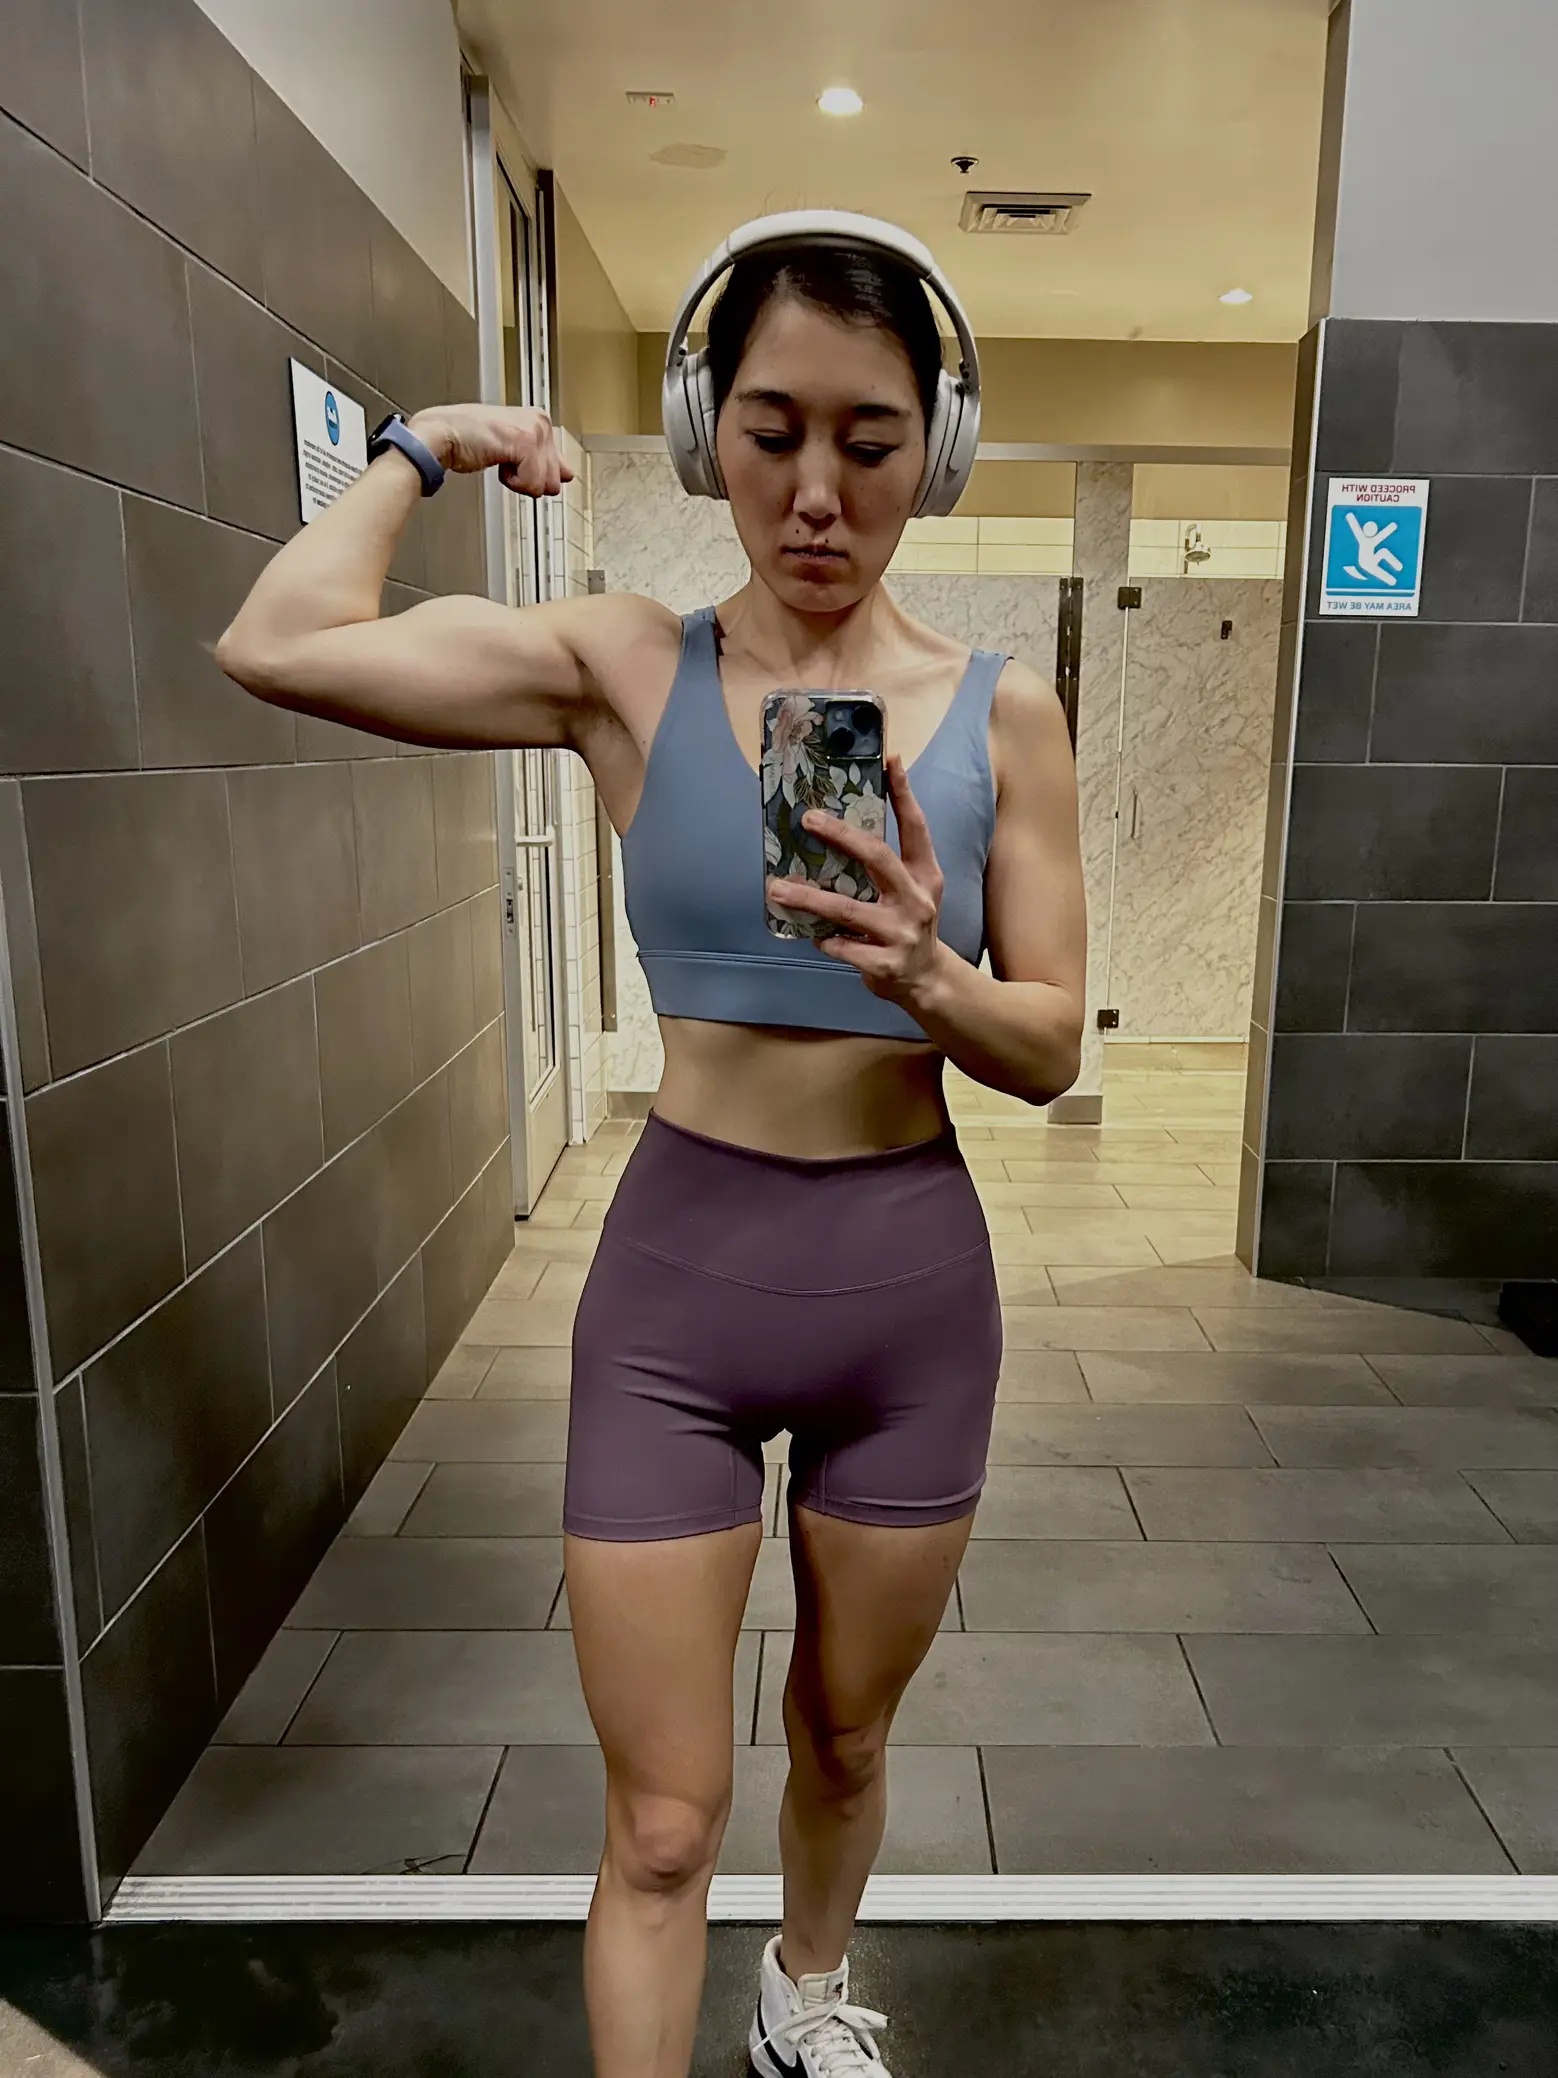 WEEK OF GYM FITS- EDITION, Gallery posted by alyssafoxfit